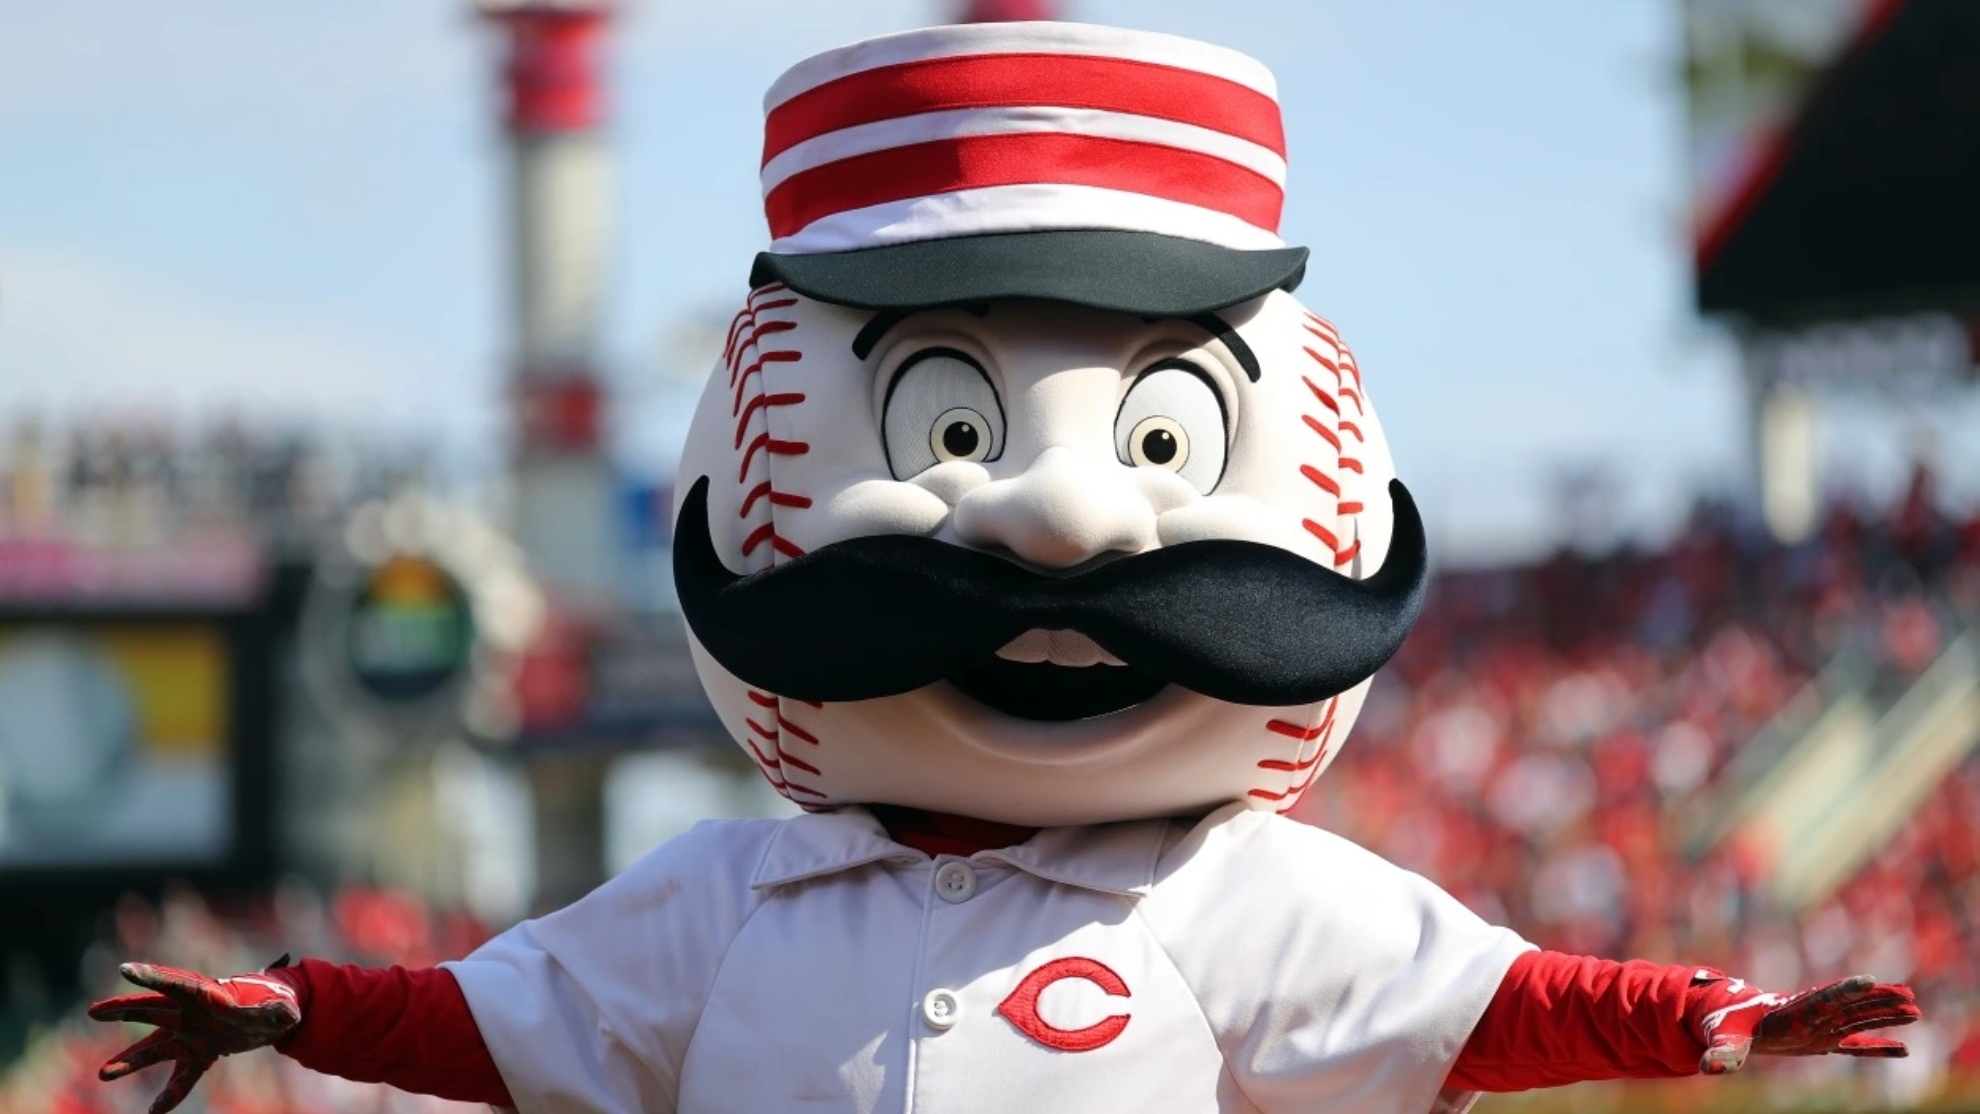 Cincinnati Reds president mocks angry fans: "Where are you going to go?"